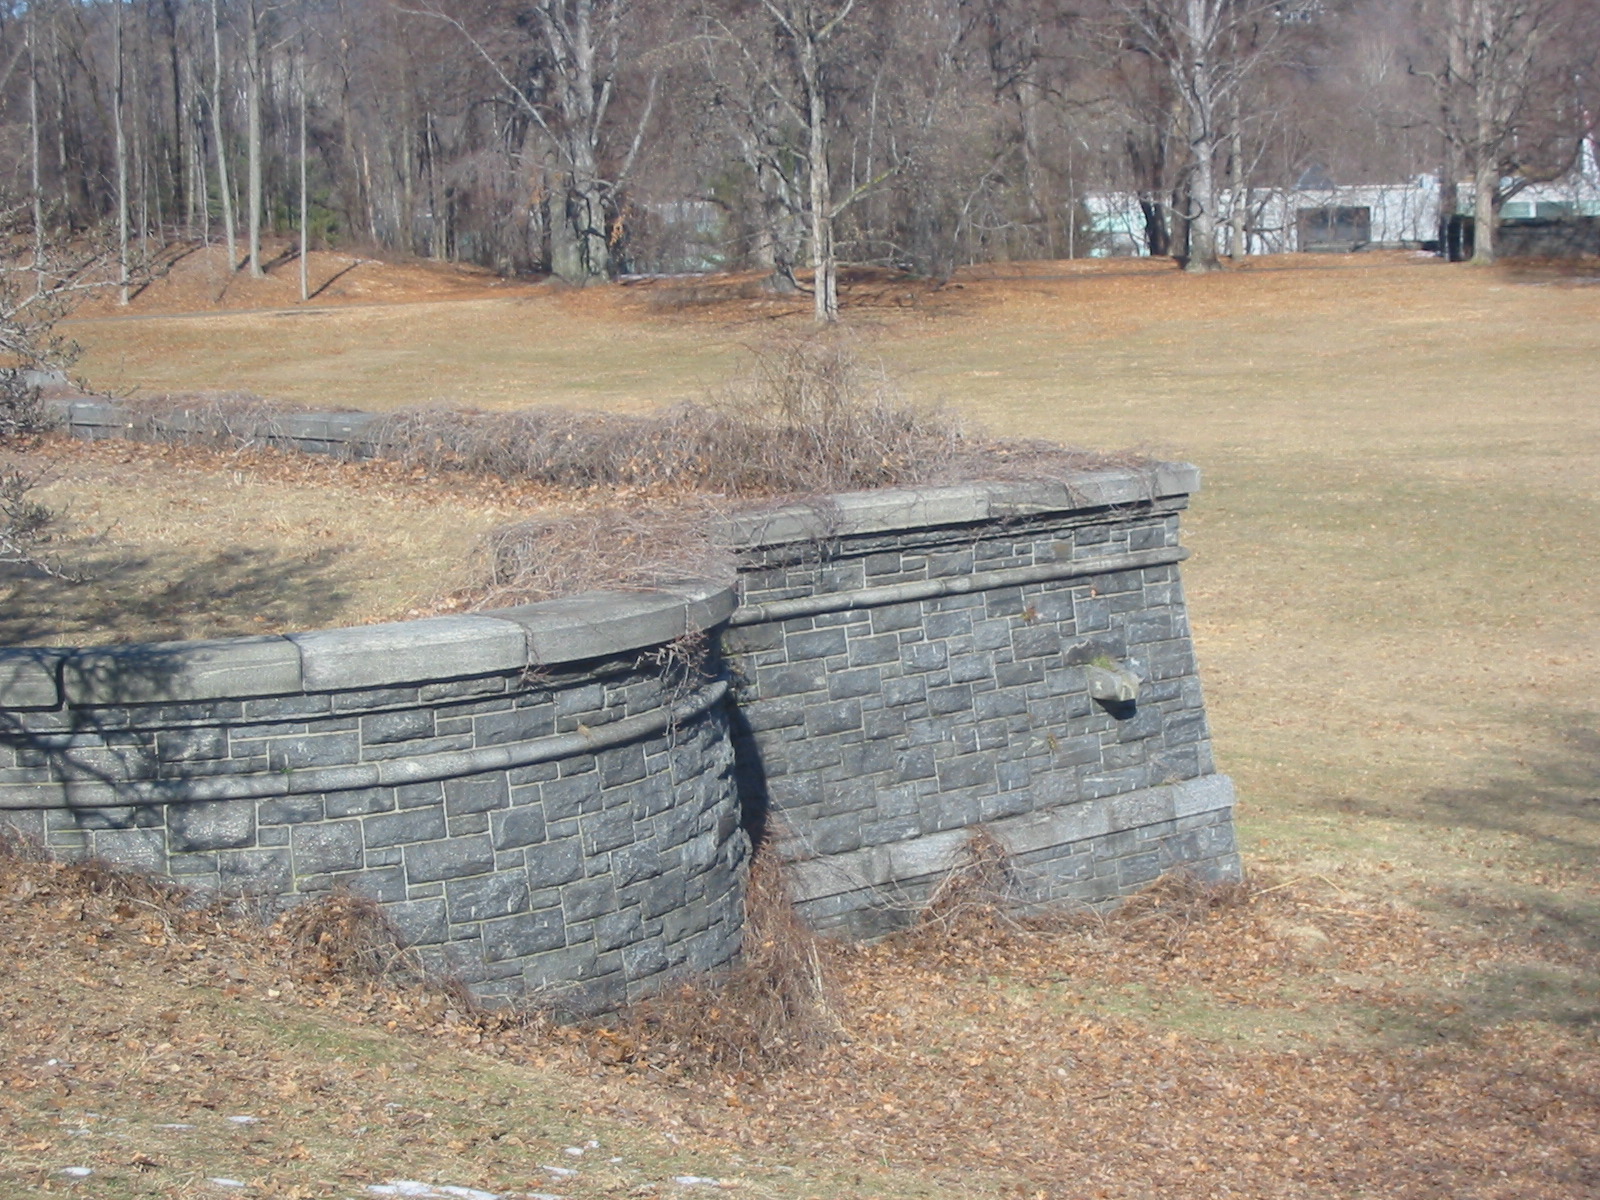 Foundation of the Rockwood Hall mansion - Photo by Daniel Chazin